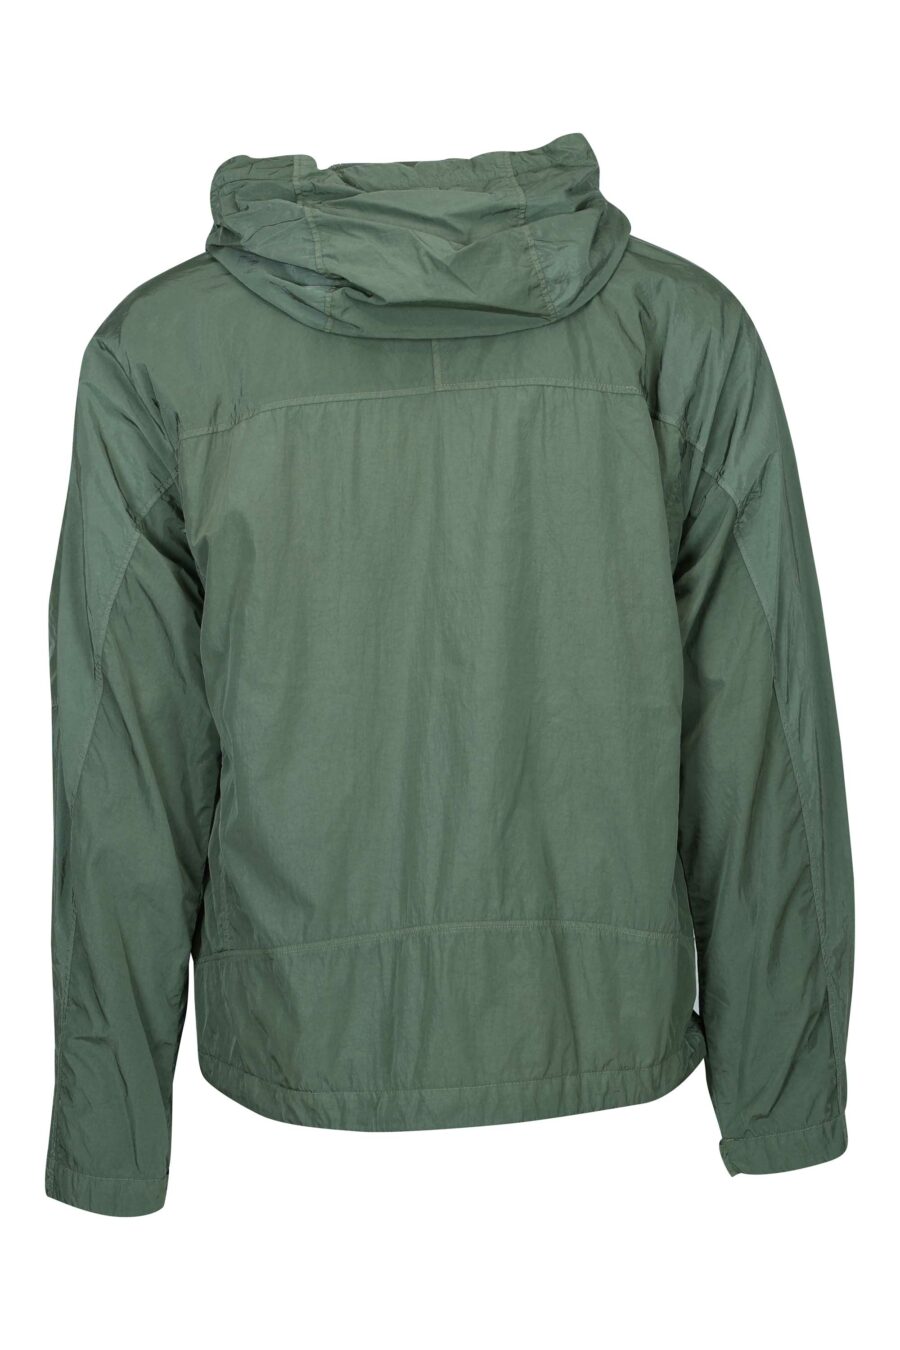 Taupe green jacket with hood and logo - 7620943713411 1